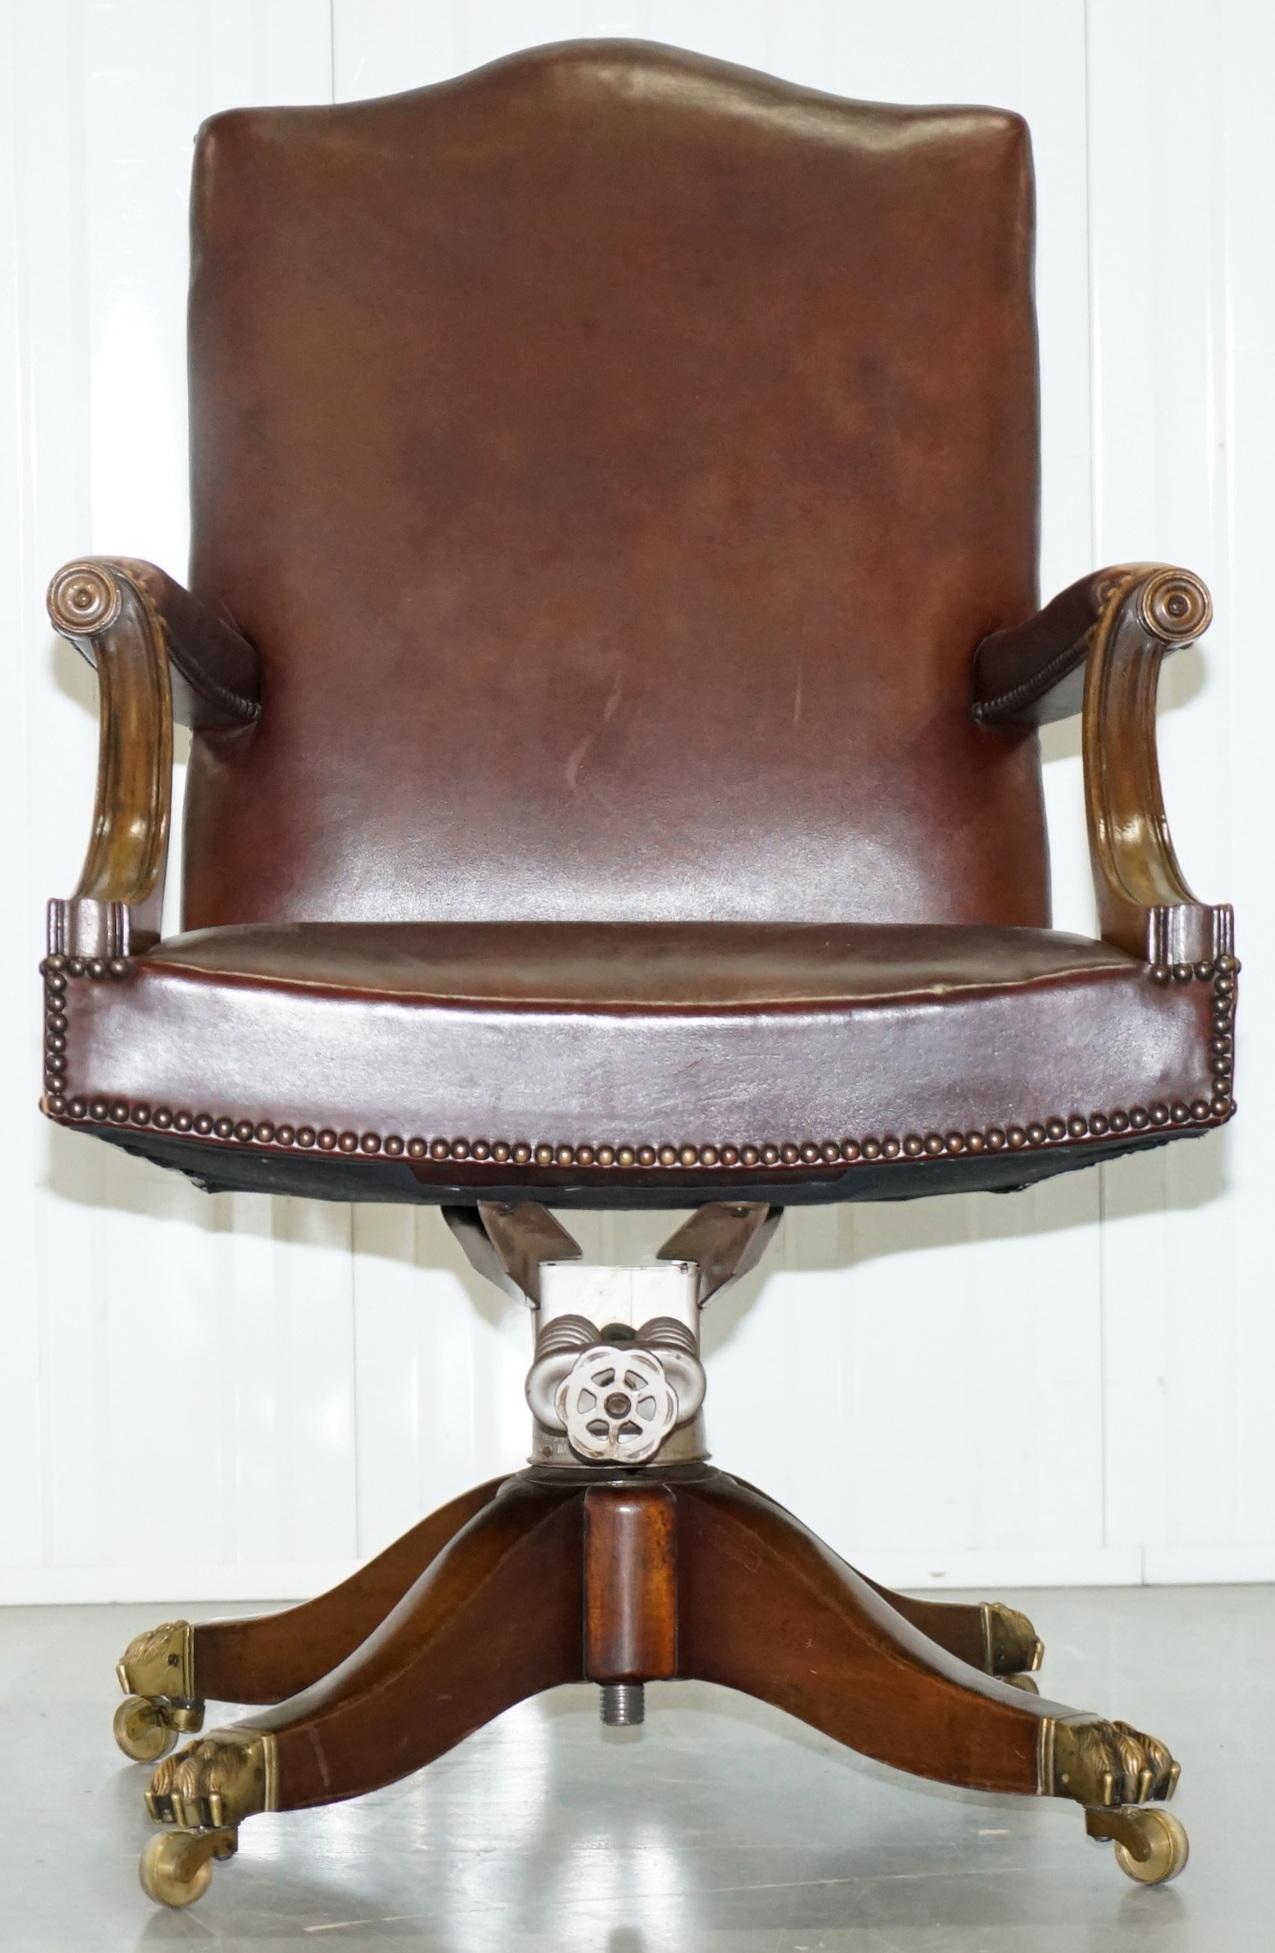 We are delighted to offer for sale this lovely original 1930s Hillcrest Gainsborough aged brown leather captains chair 

This model is the 